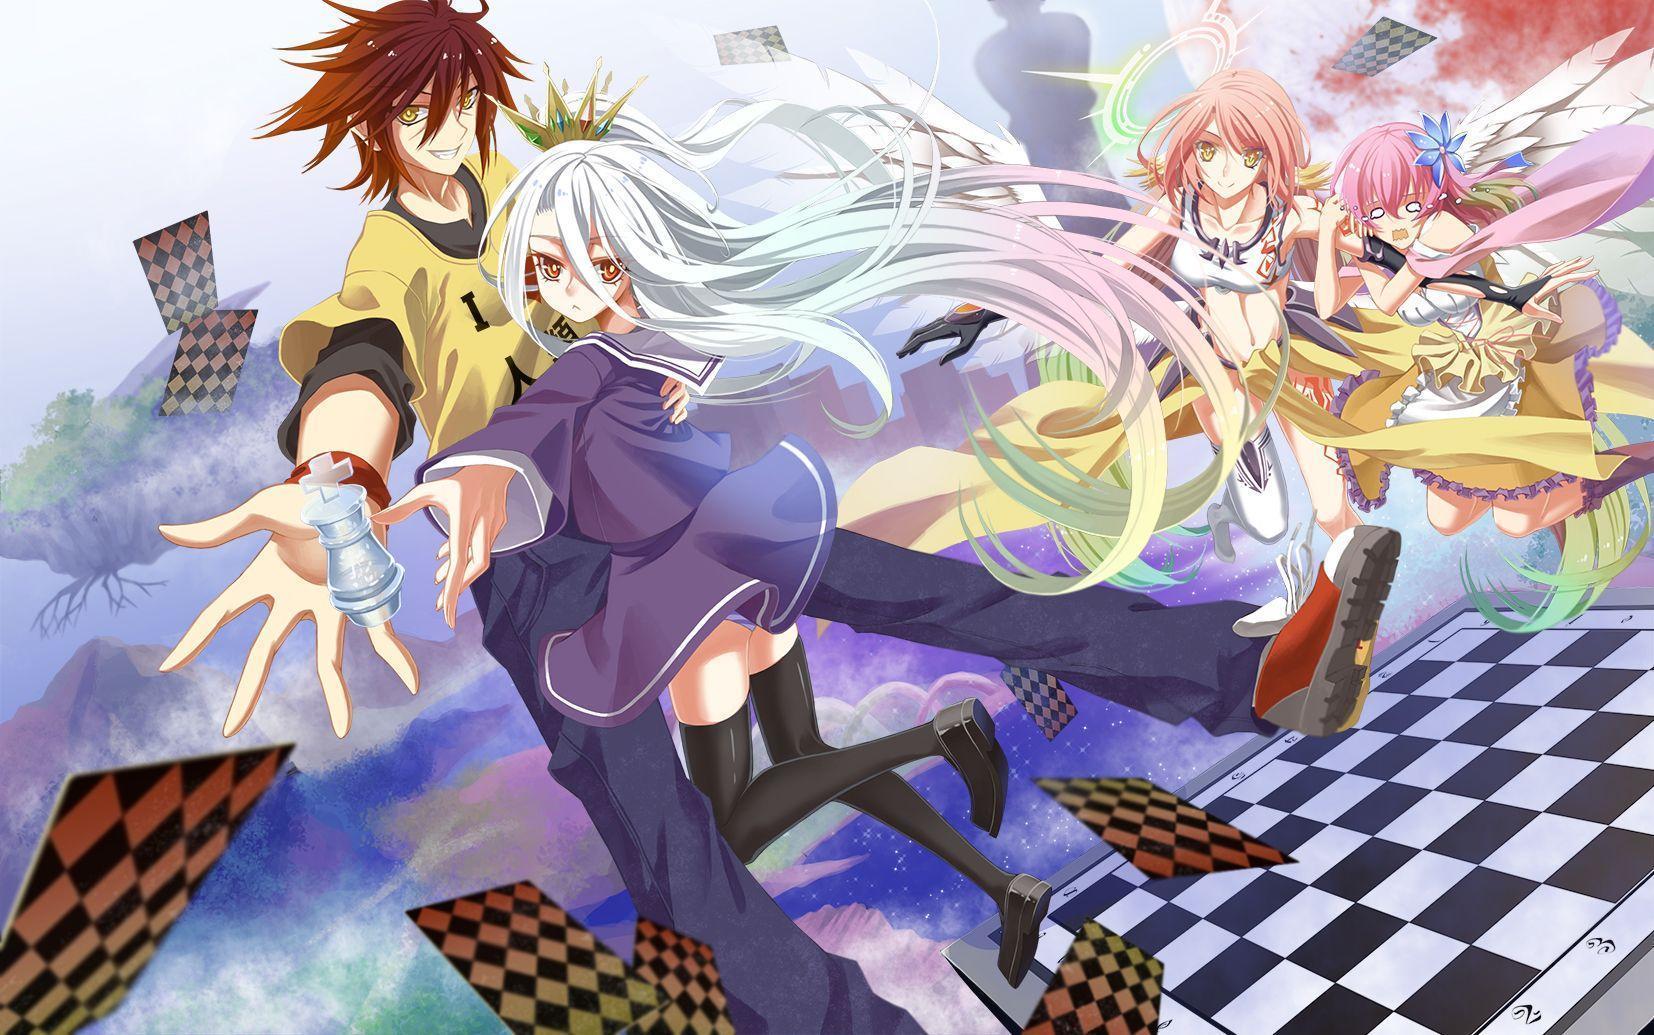 DeviantArt: More Like No Game No Life Wallpapers by Redeye27